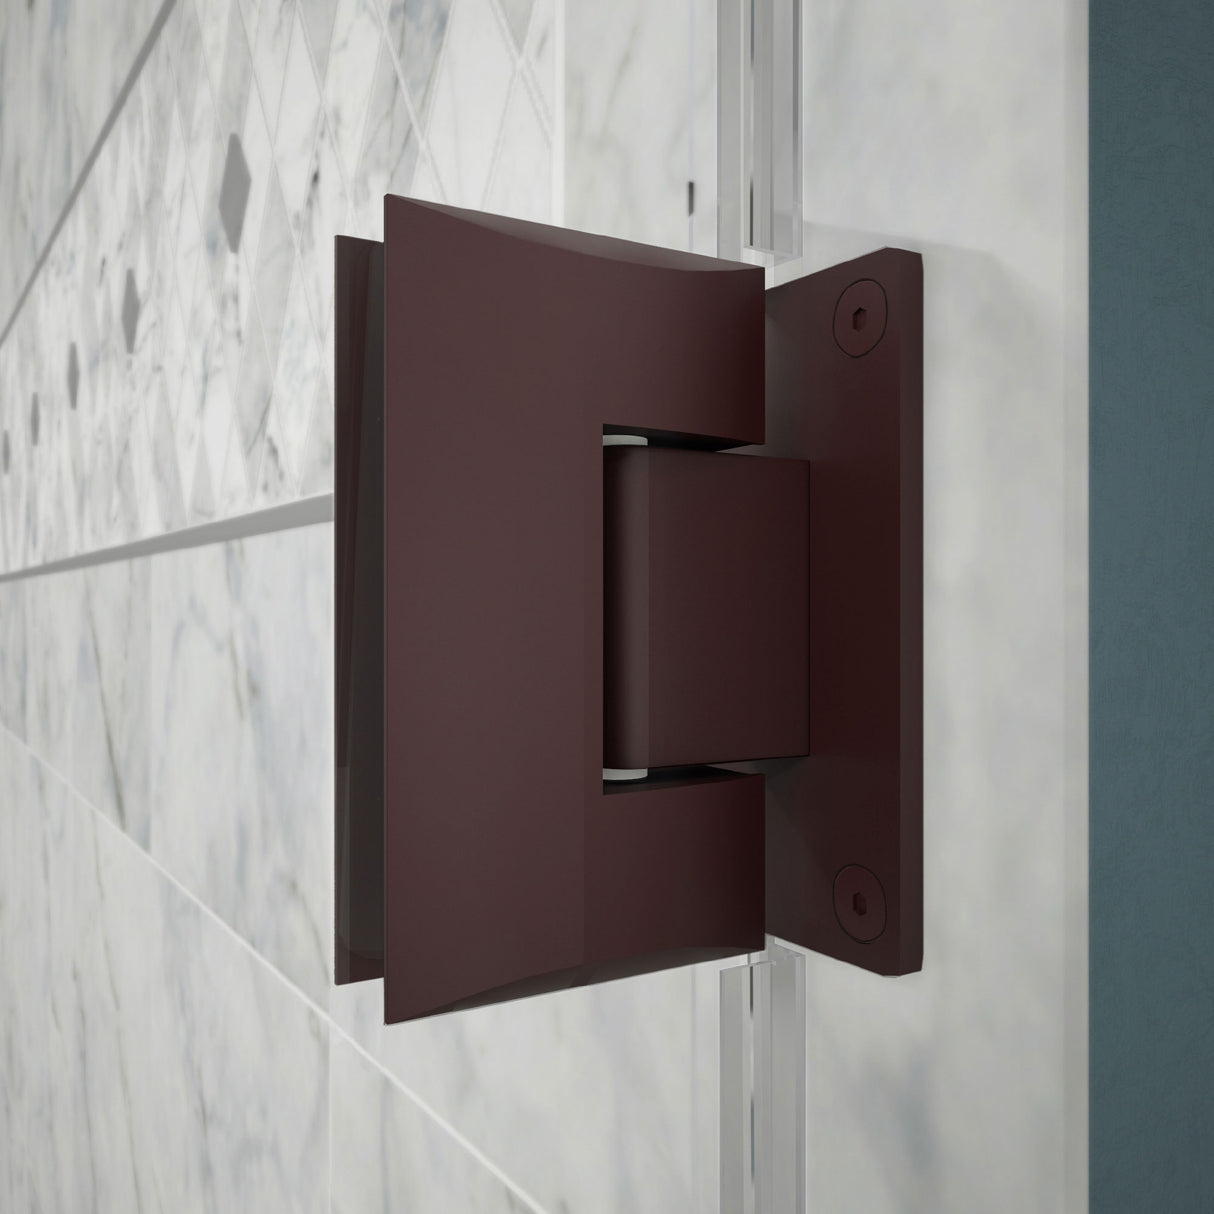 DreamLine Unidoor Plus 54 in. W x 30 3/8 in. D x 72 in. H Frameless Hinged Shower Enclosure in Oil Rubbed Bronze